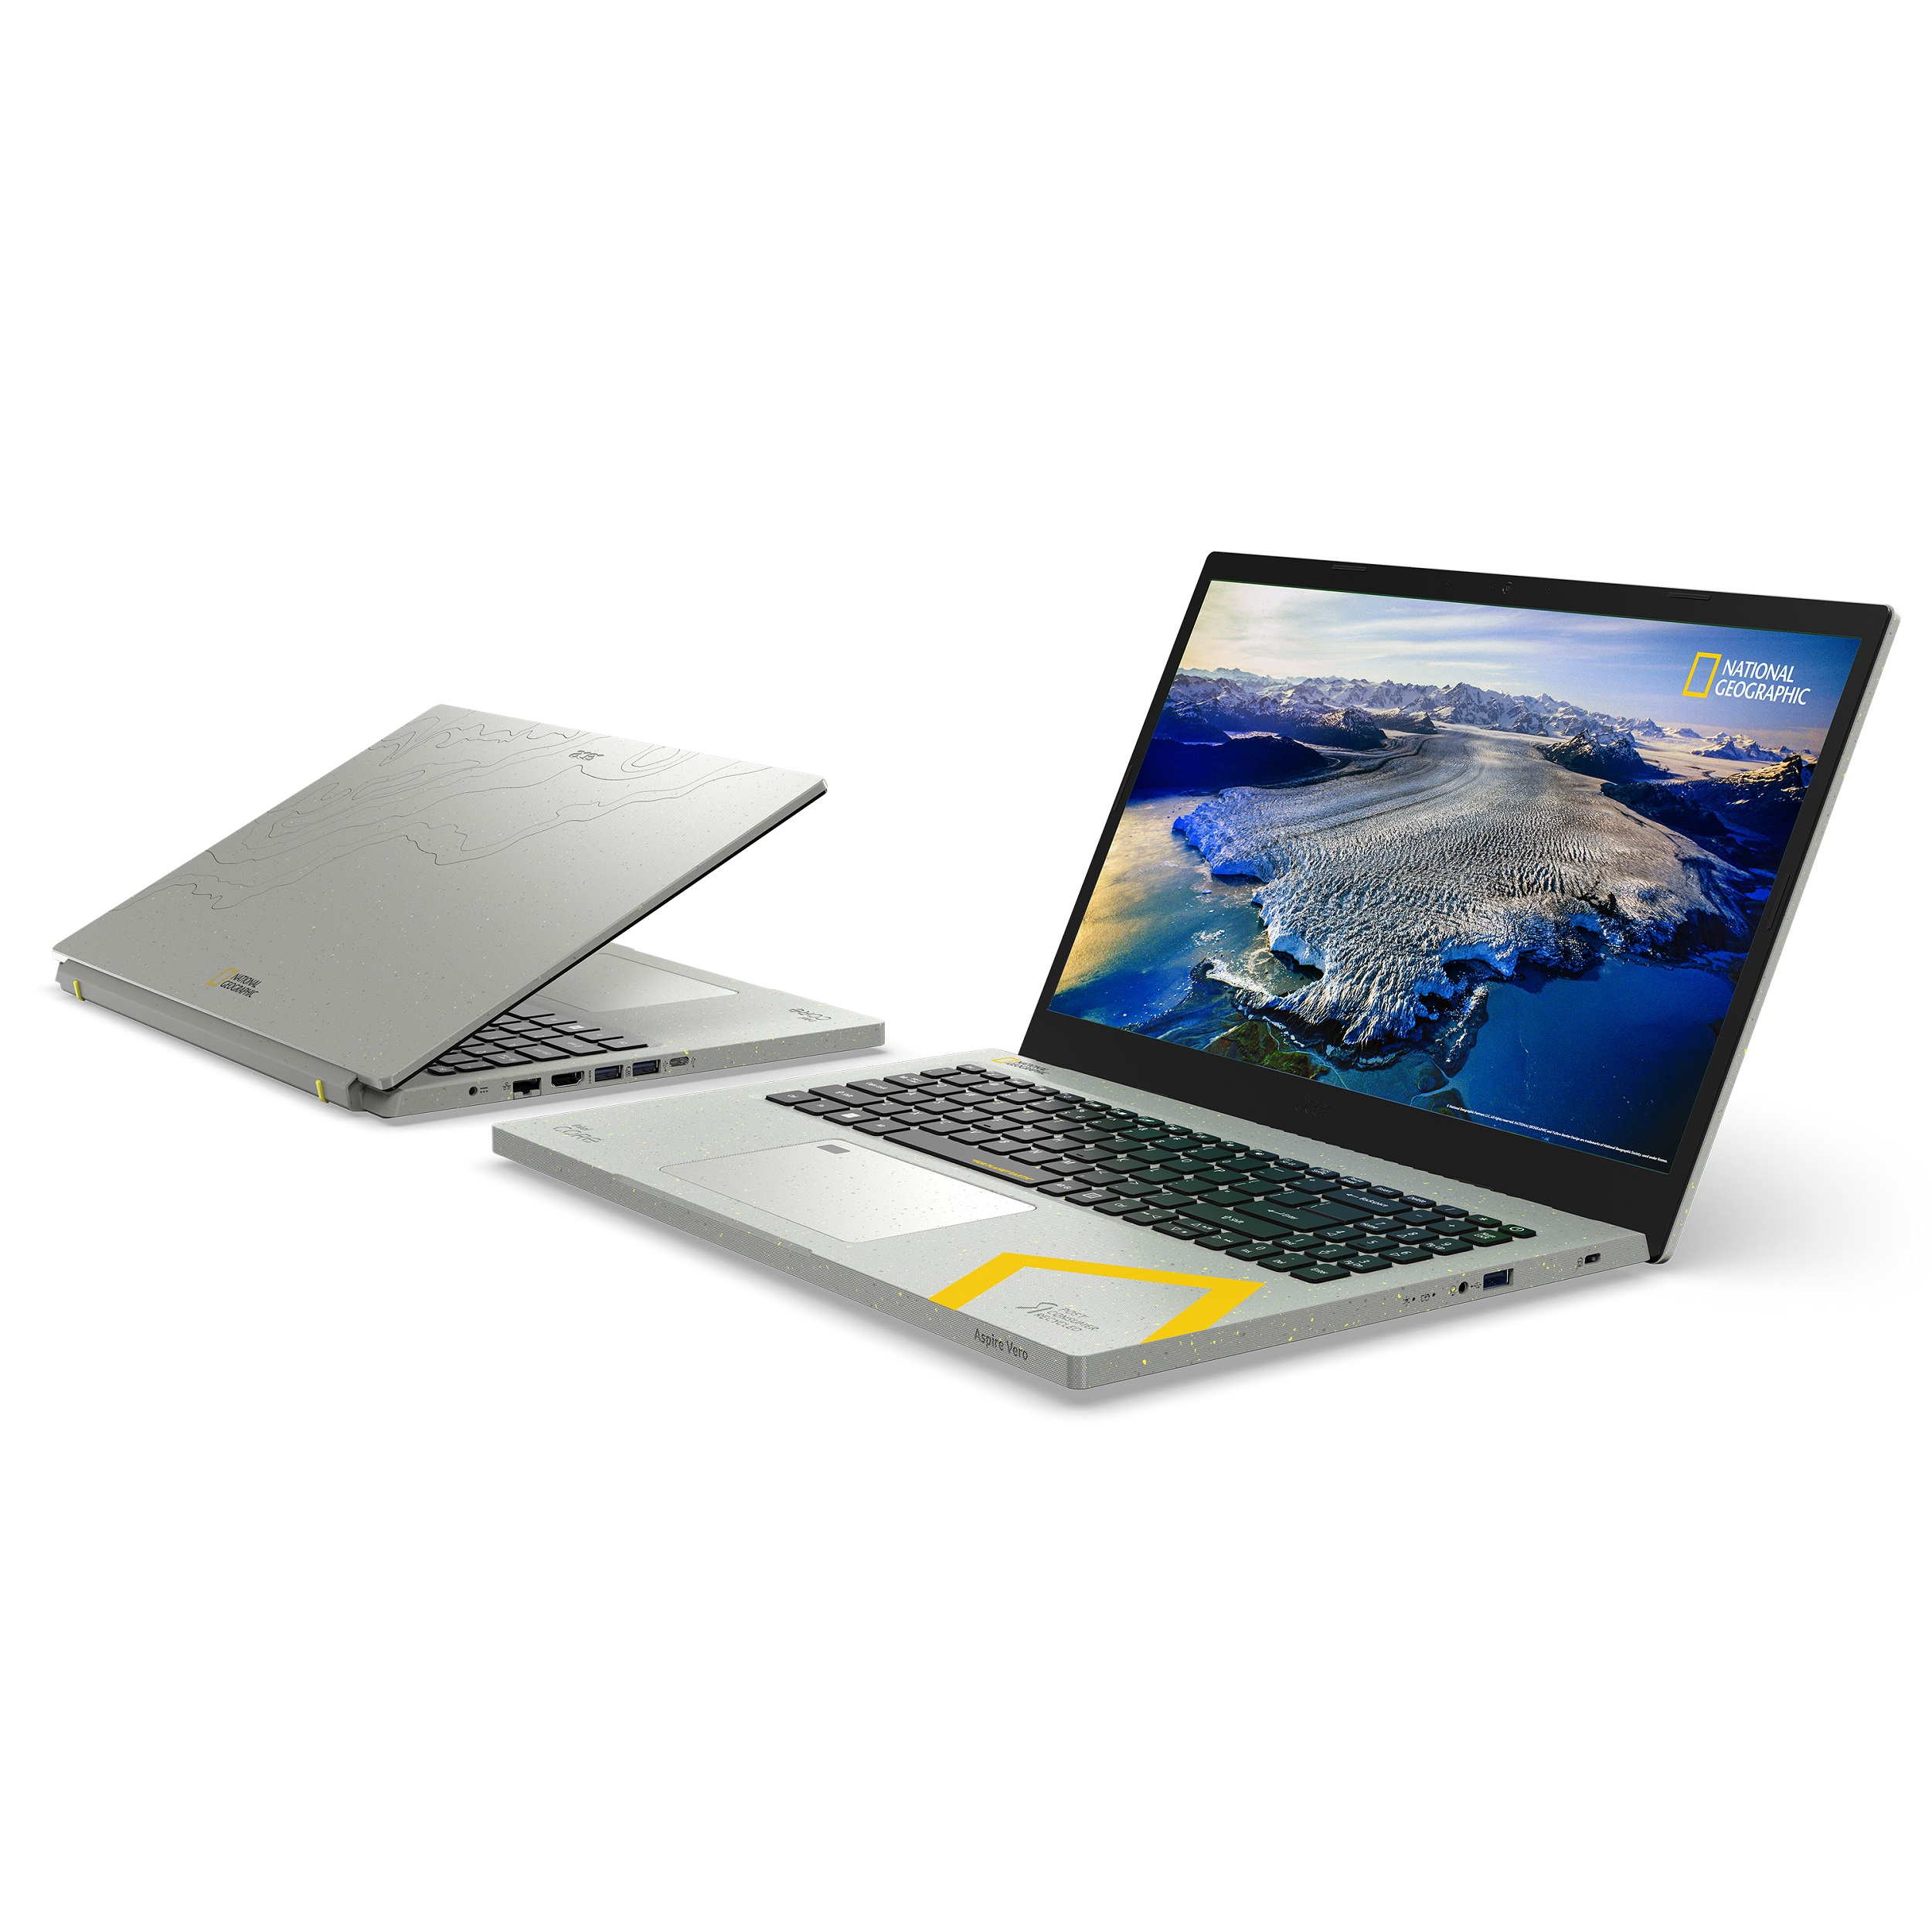 Acer Announces the Aspire Vero National Geographic Edition, a Laptop for a Better Future decoding=